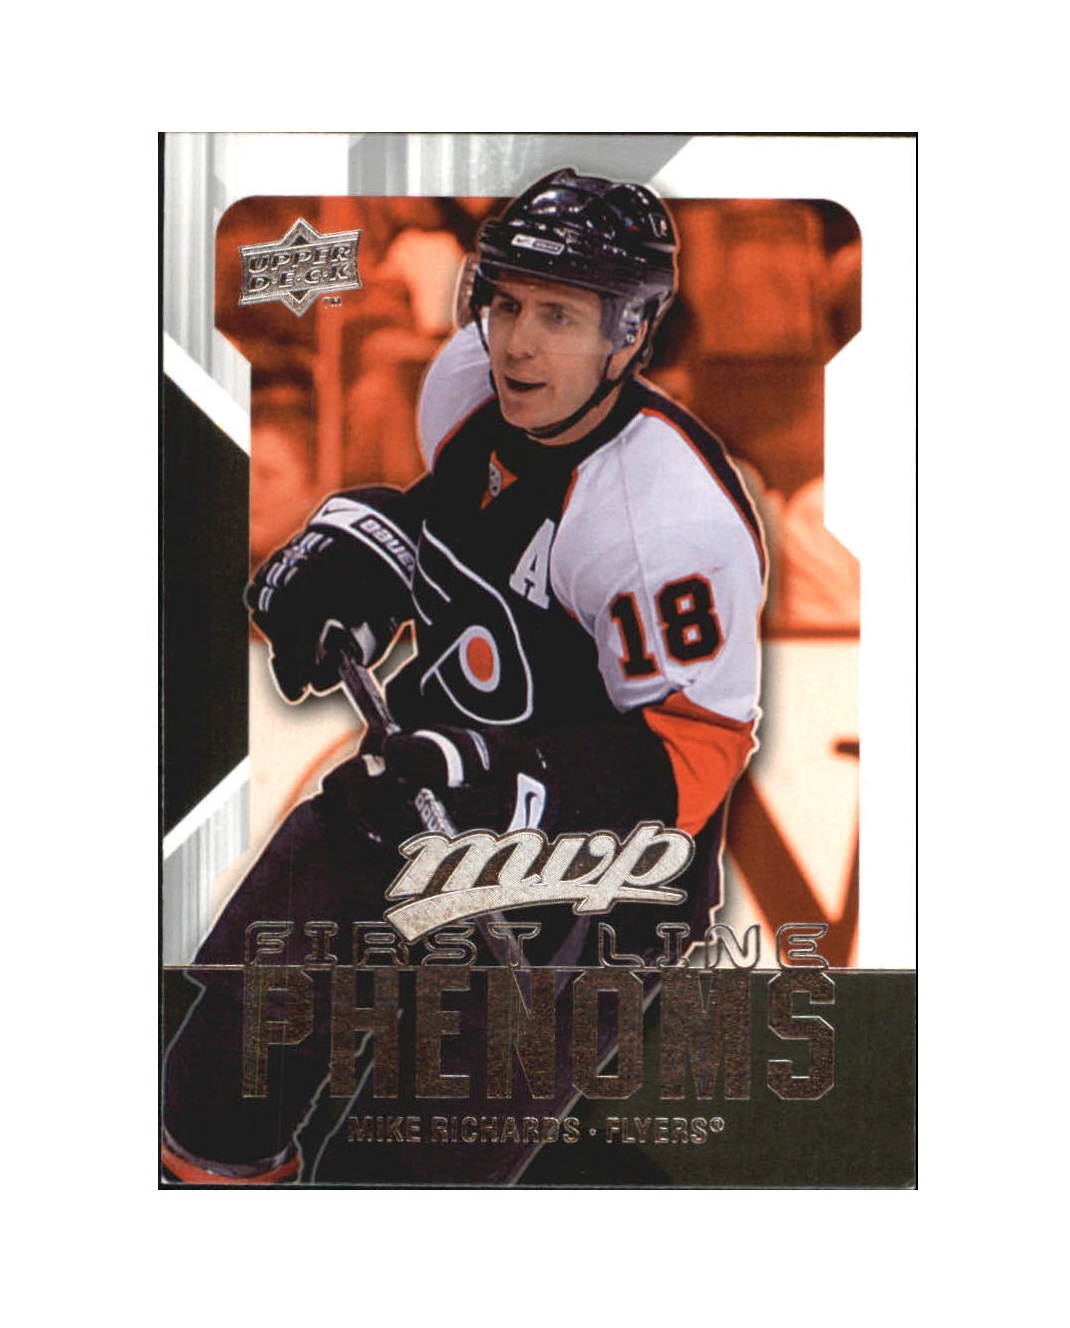 2008-09 Upper Deck MVP First Line Phenoms #FL6 Mike Richards (10-X117-FLYERS) (2)